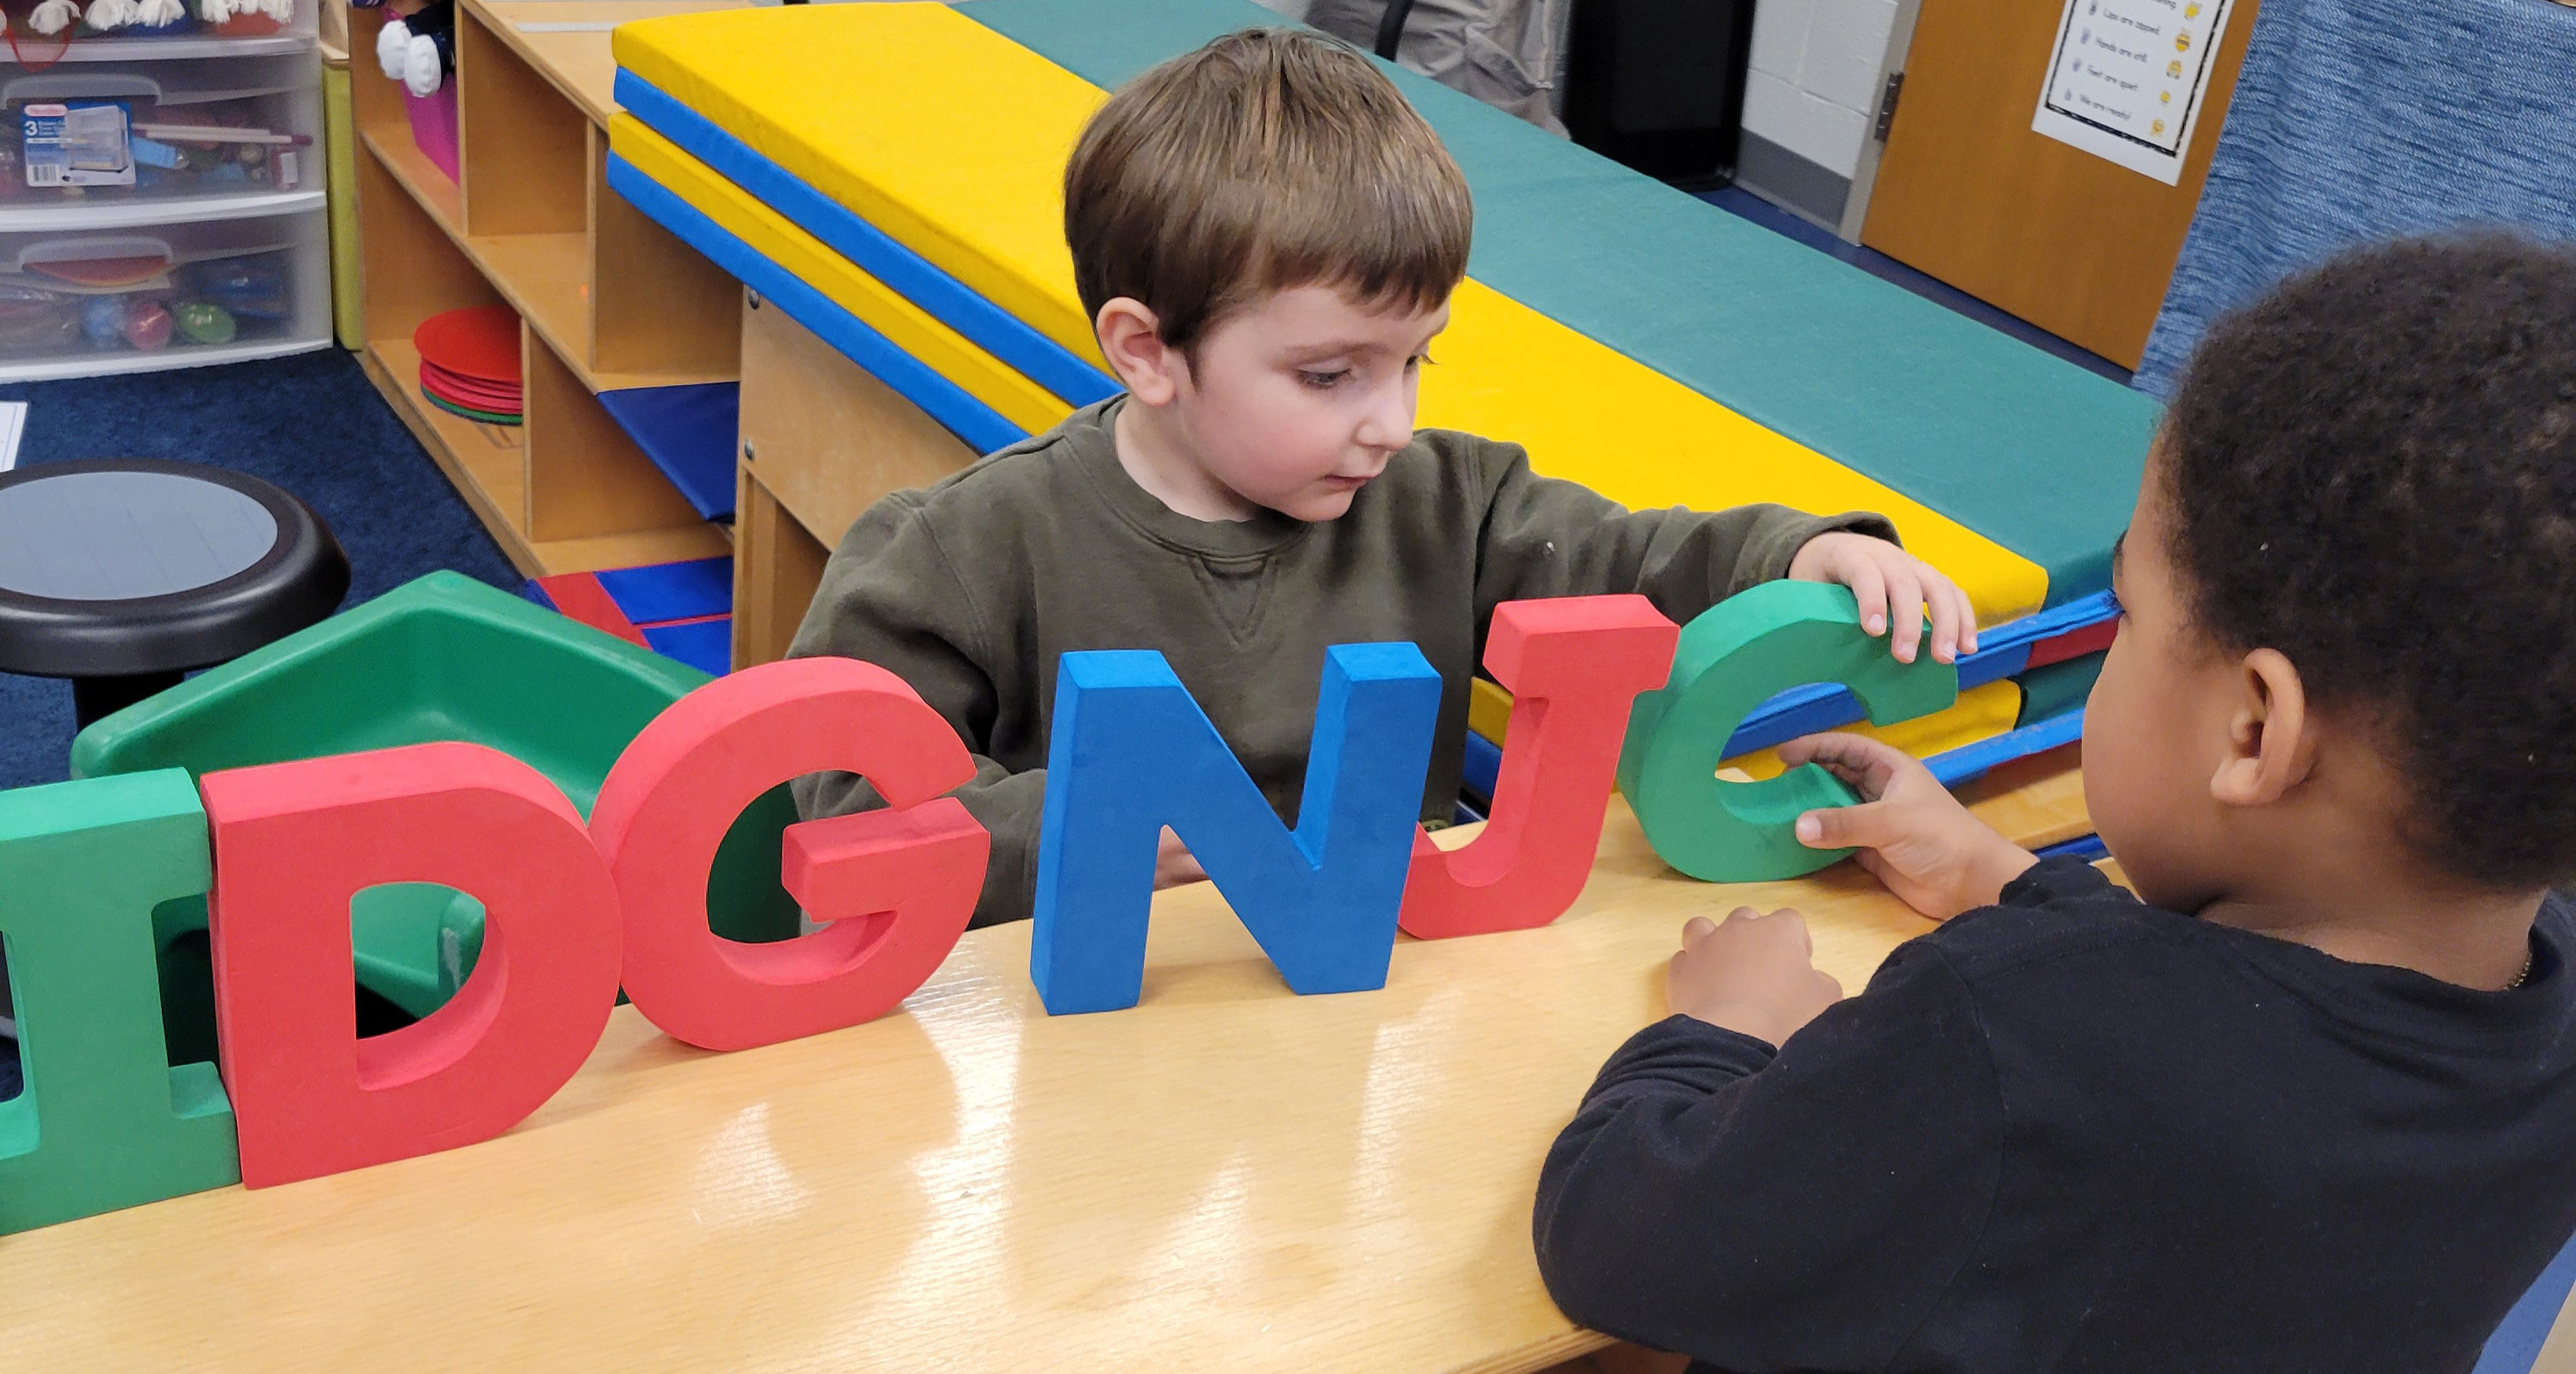 Two students playing with large plastic letters in class